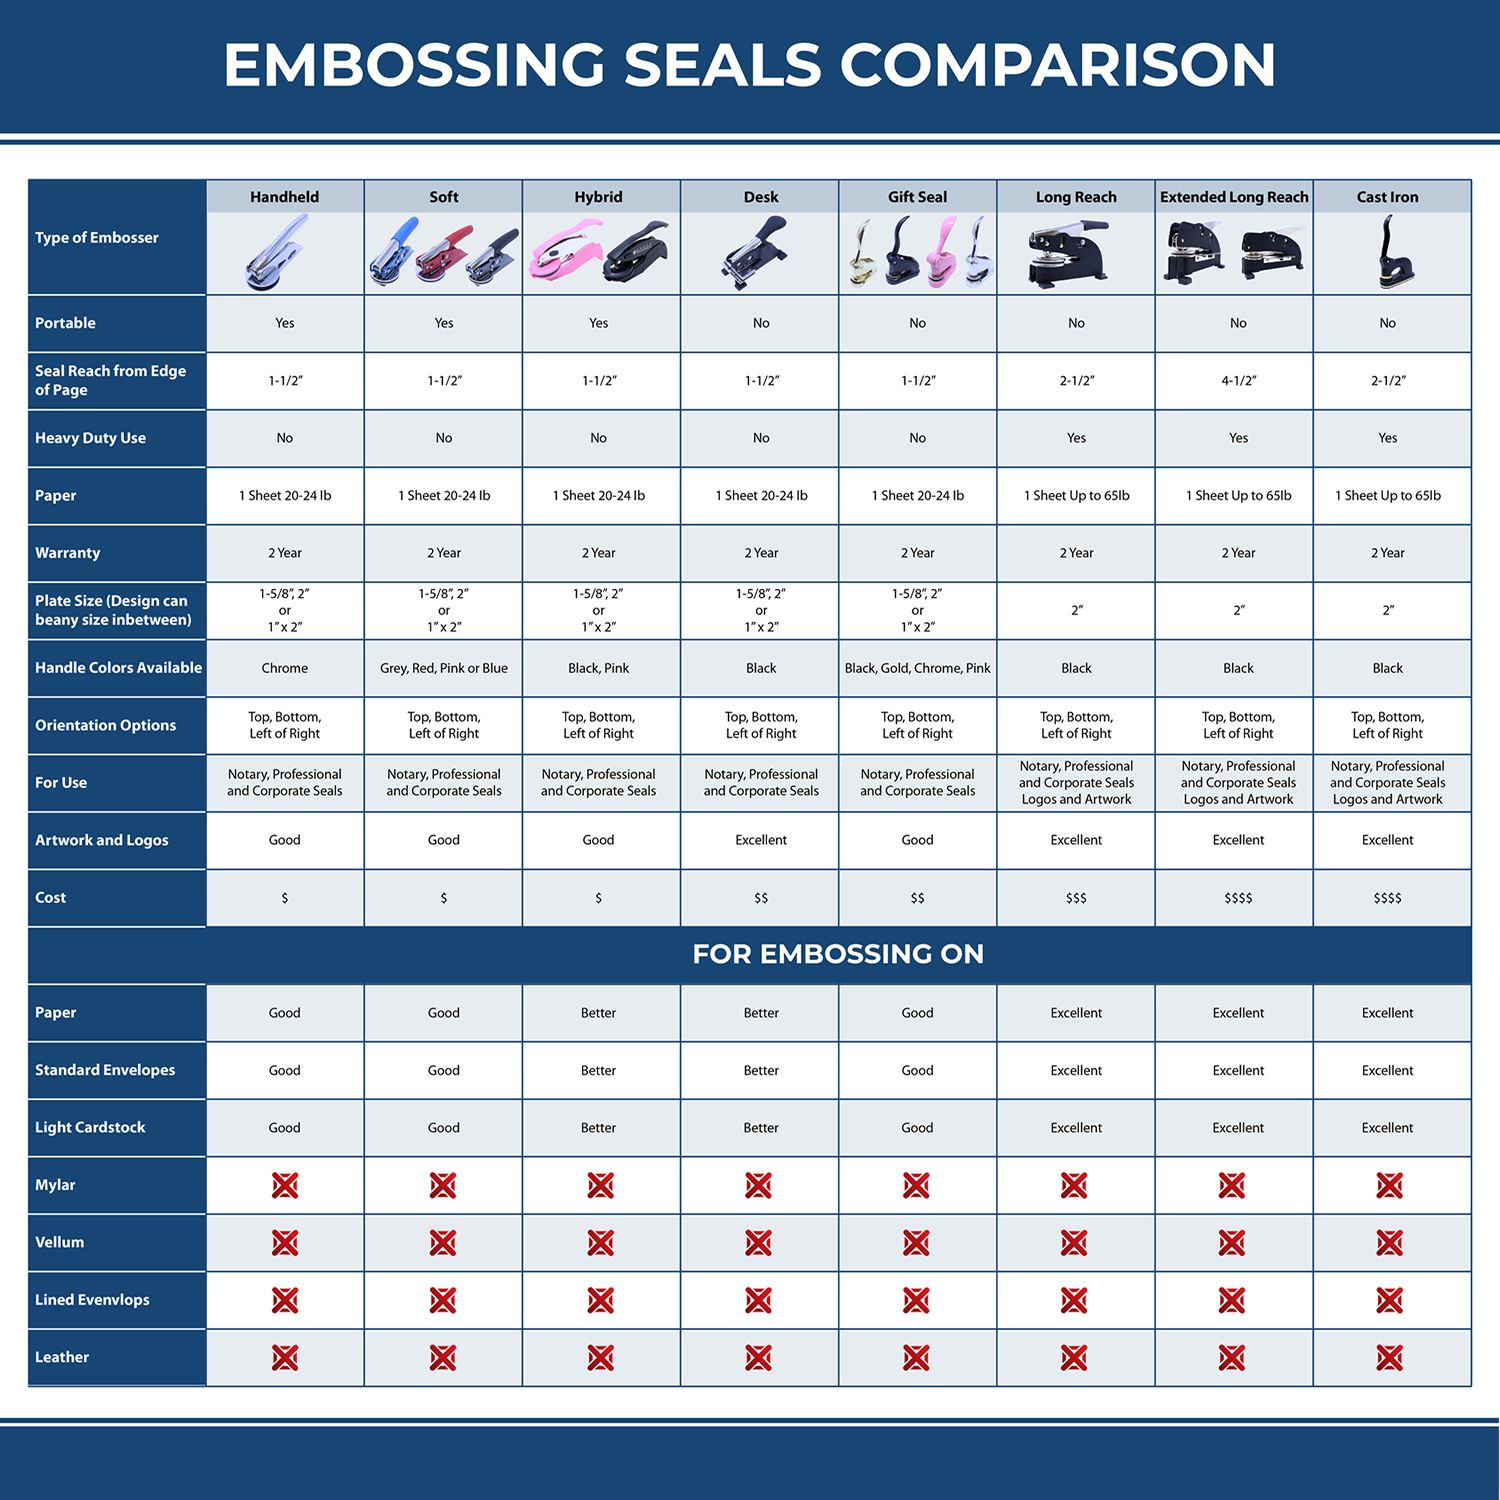 A comparison chart for the different types of mount models available for the Soft Wisconsin Professional Engineer Seal.